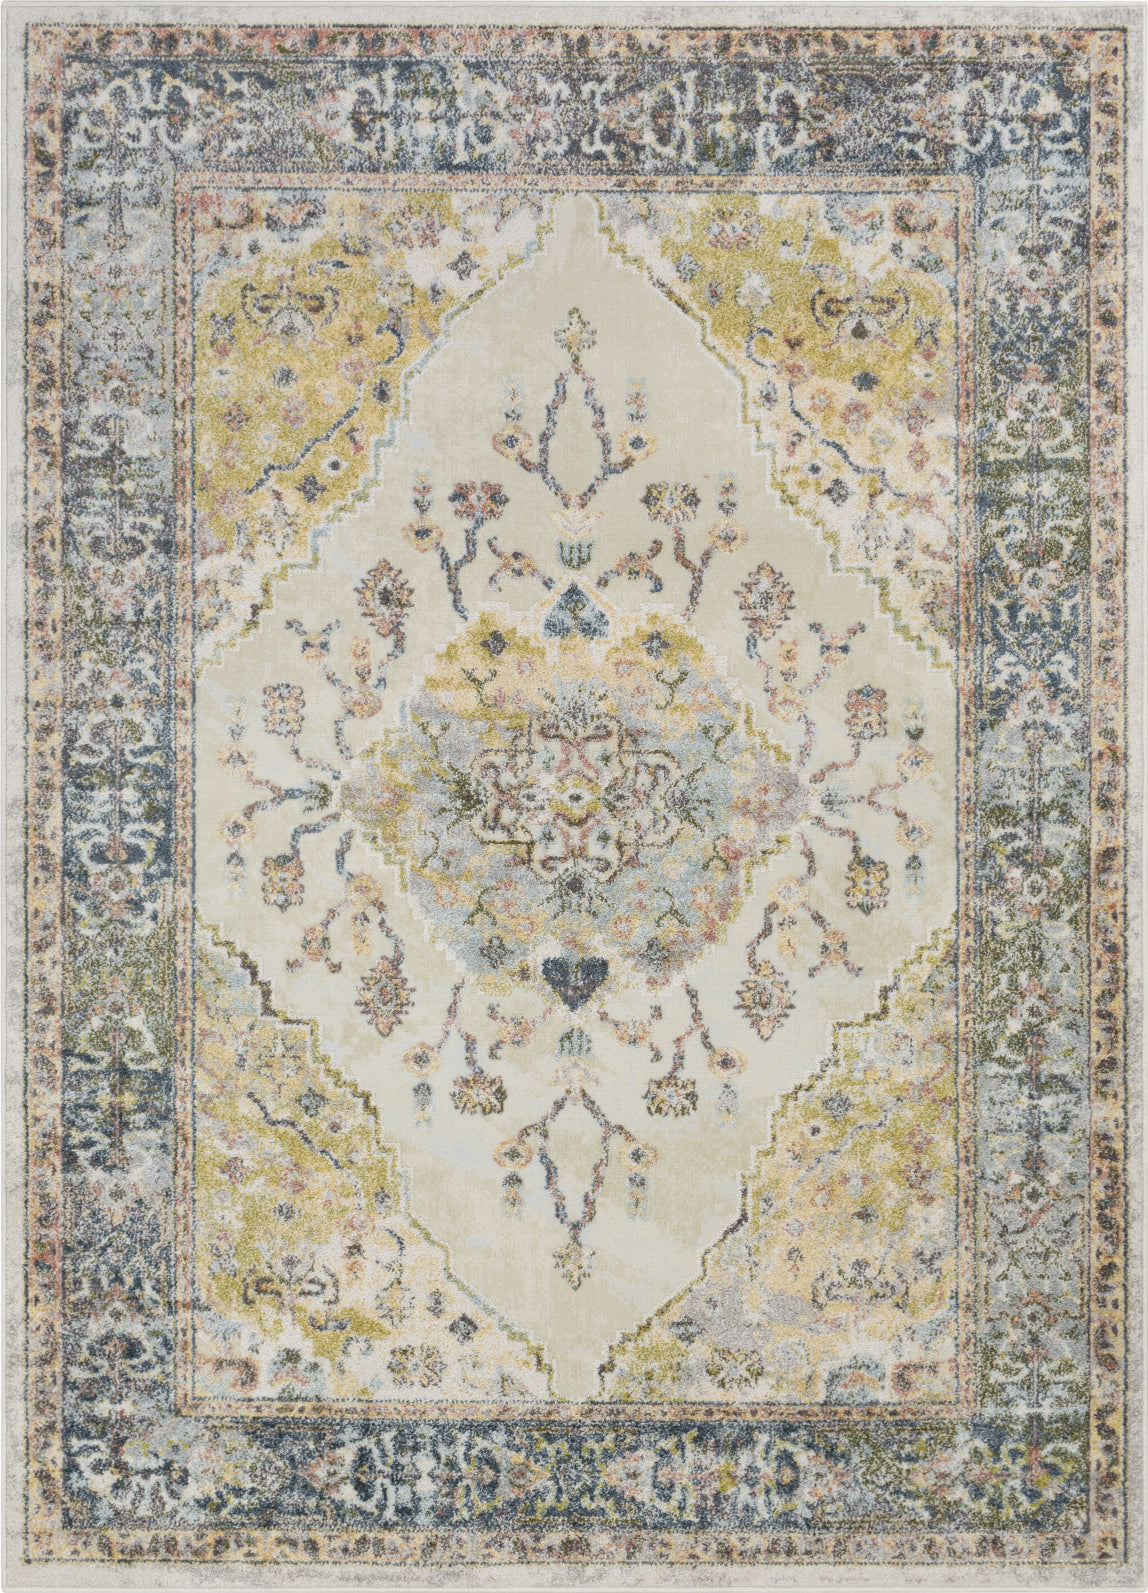 Surya New Mexico NWM-2320 Area Rug by Artistic Weavers